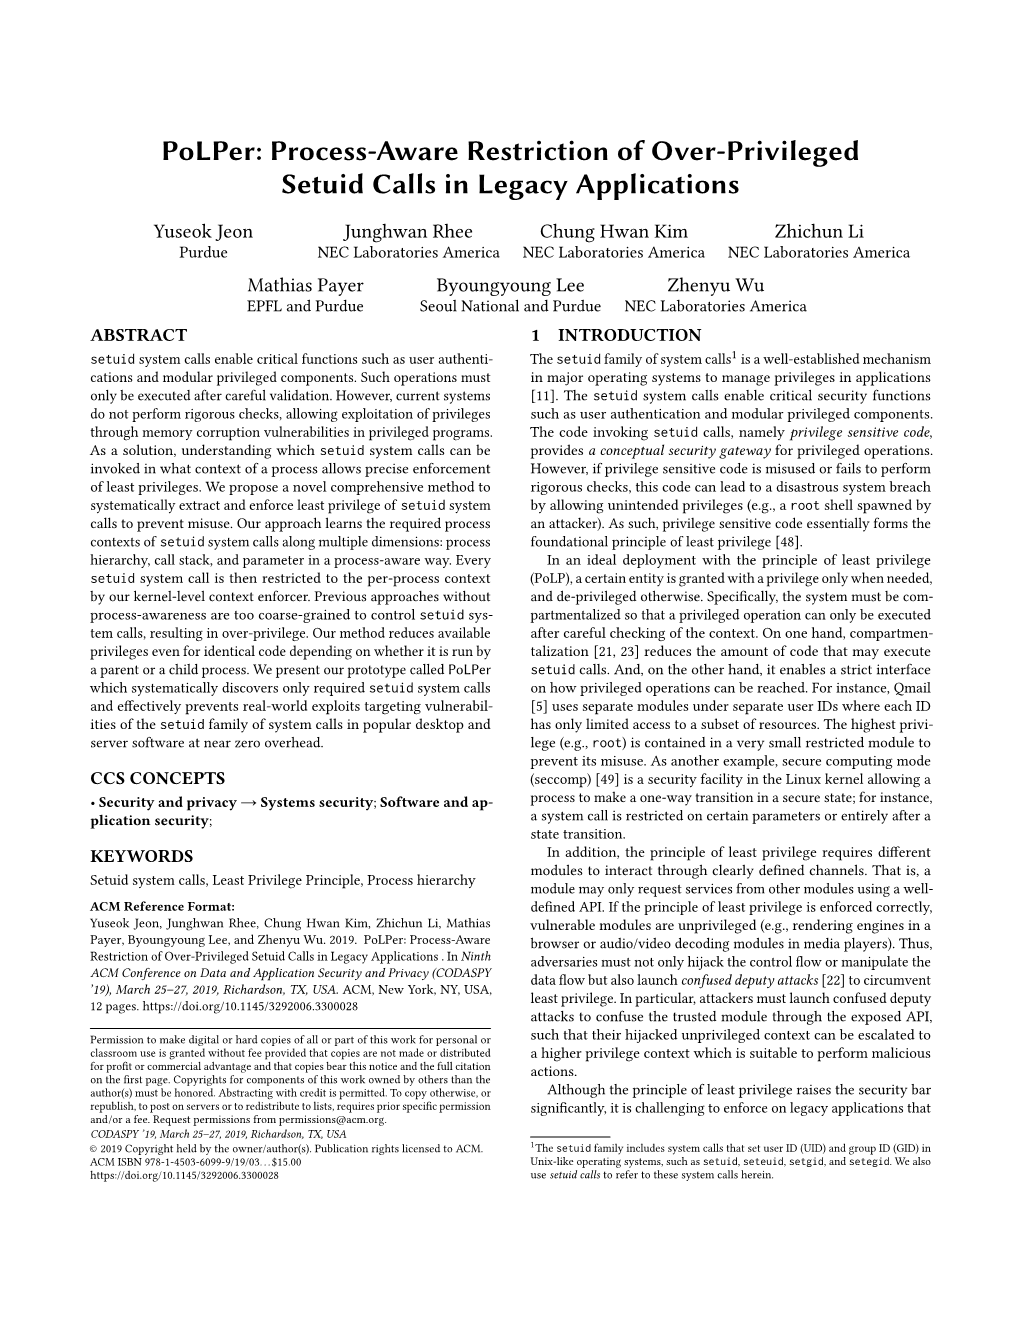 Polper: Process-Aware Restriction of Over-Privileged Setuid Calls in Legacy Applications